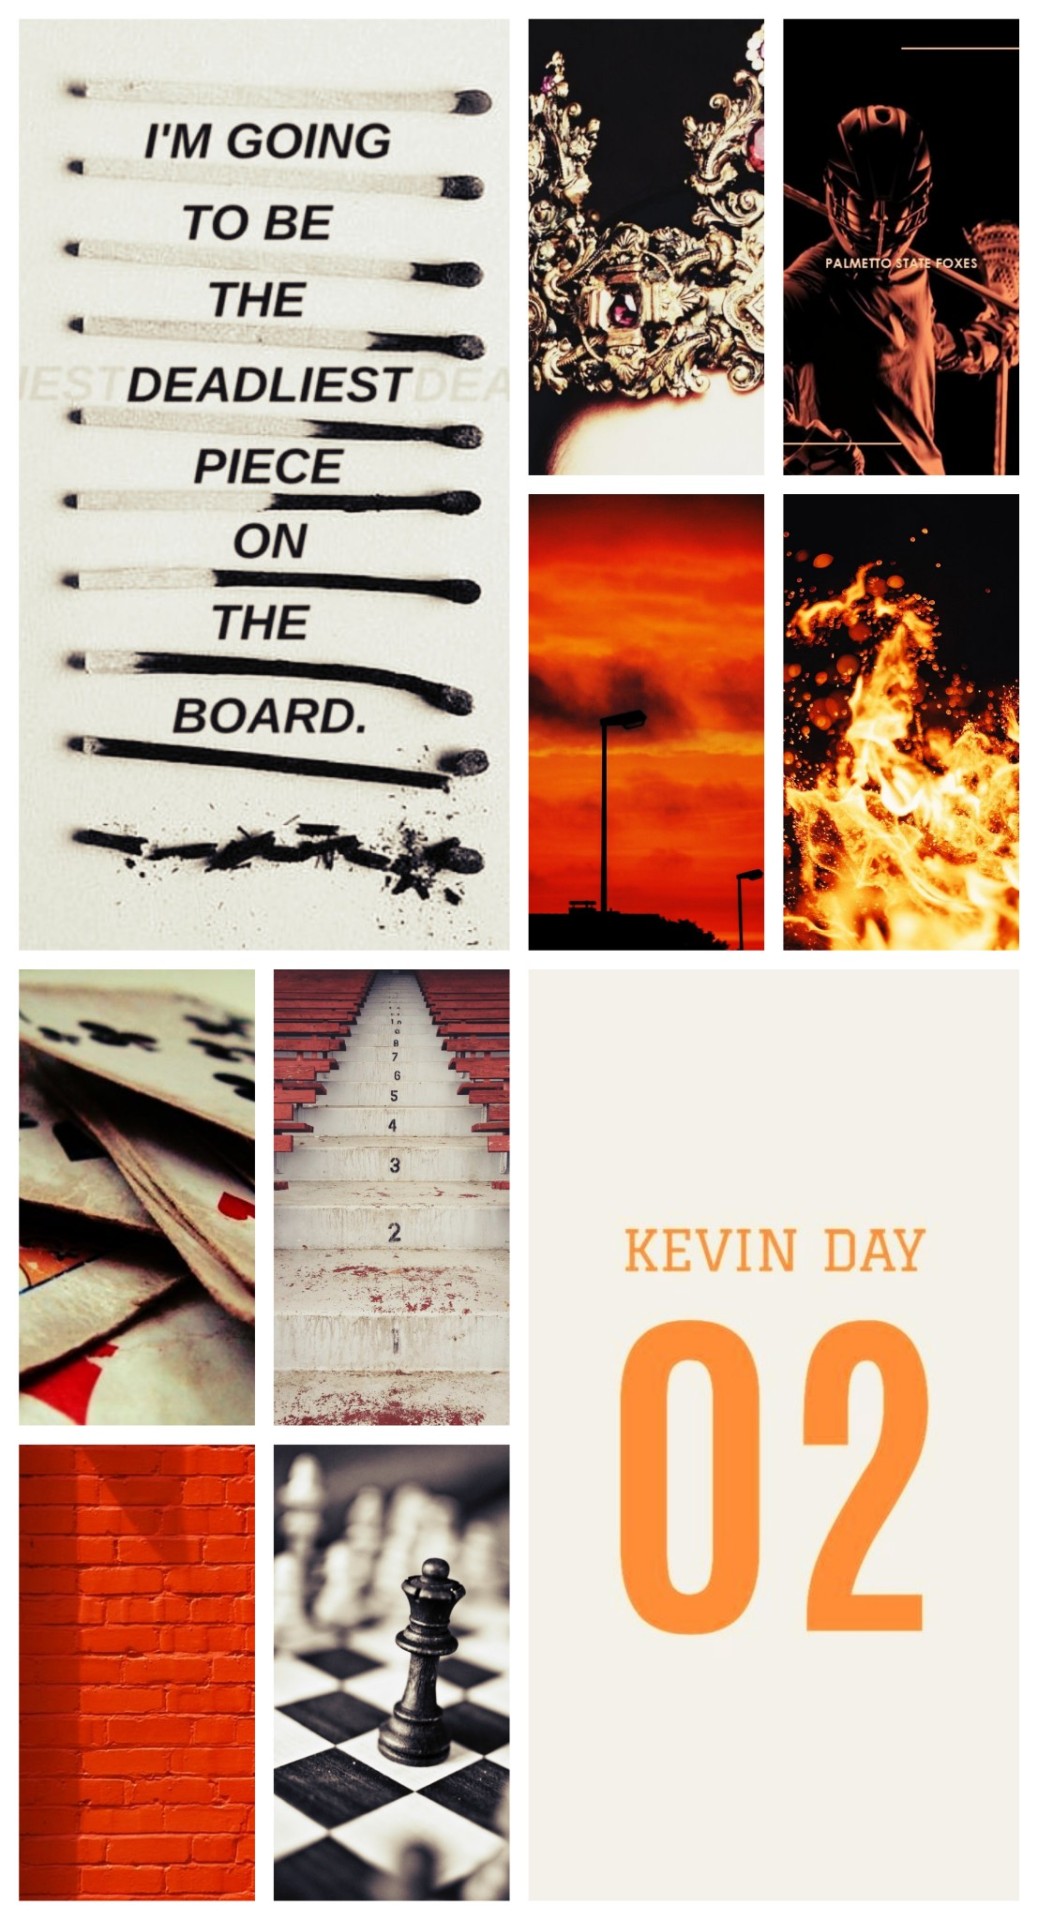 Kevin day is god end of story